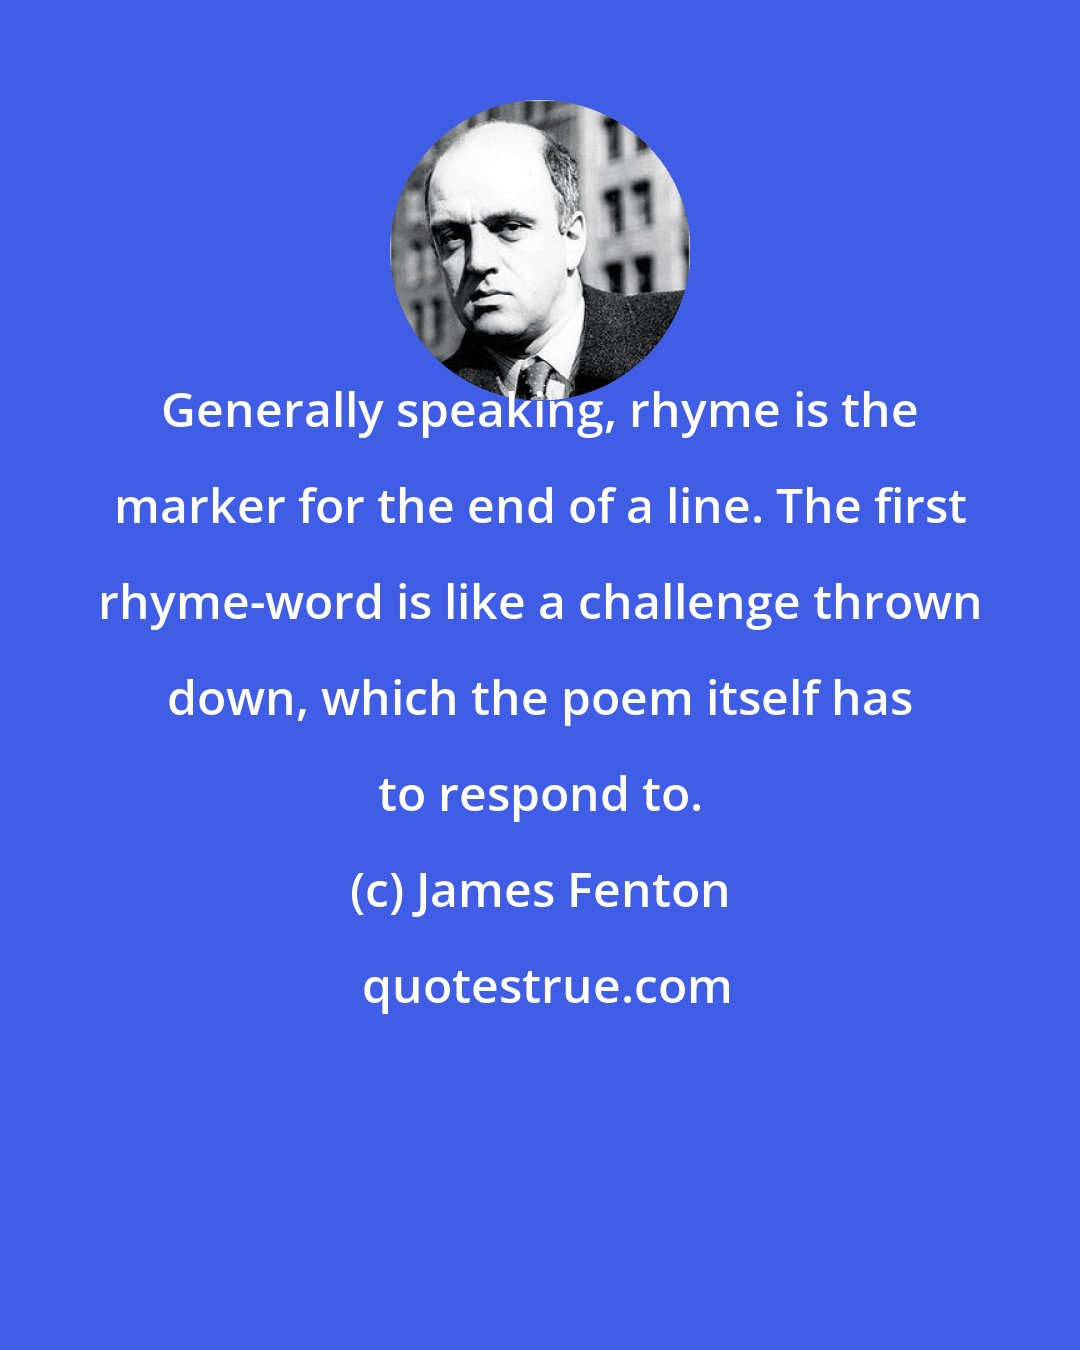 James Fenton: Generally speaking, rhyme is the marker for the end of a line. The first rhyme-word is like a challenge thrown down, which the poem itself has to respond to.